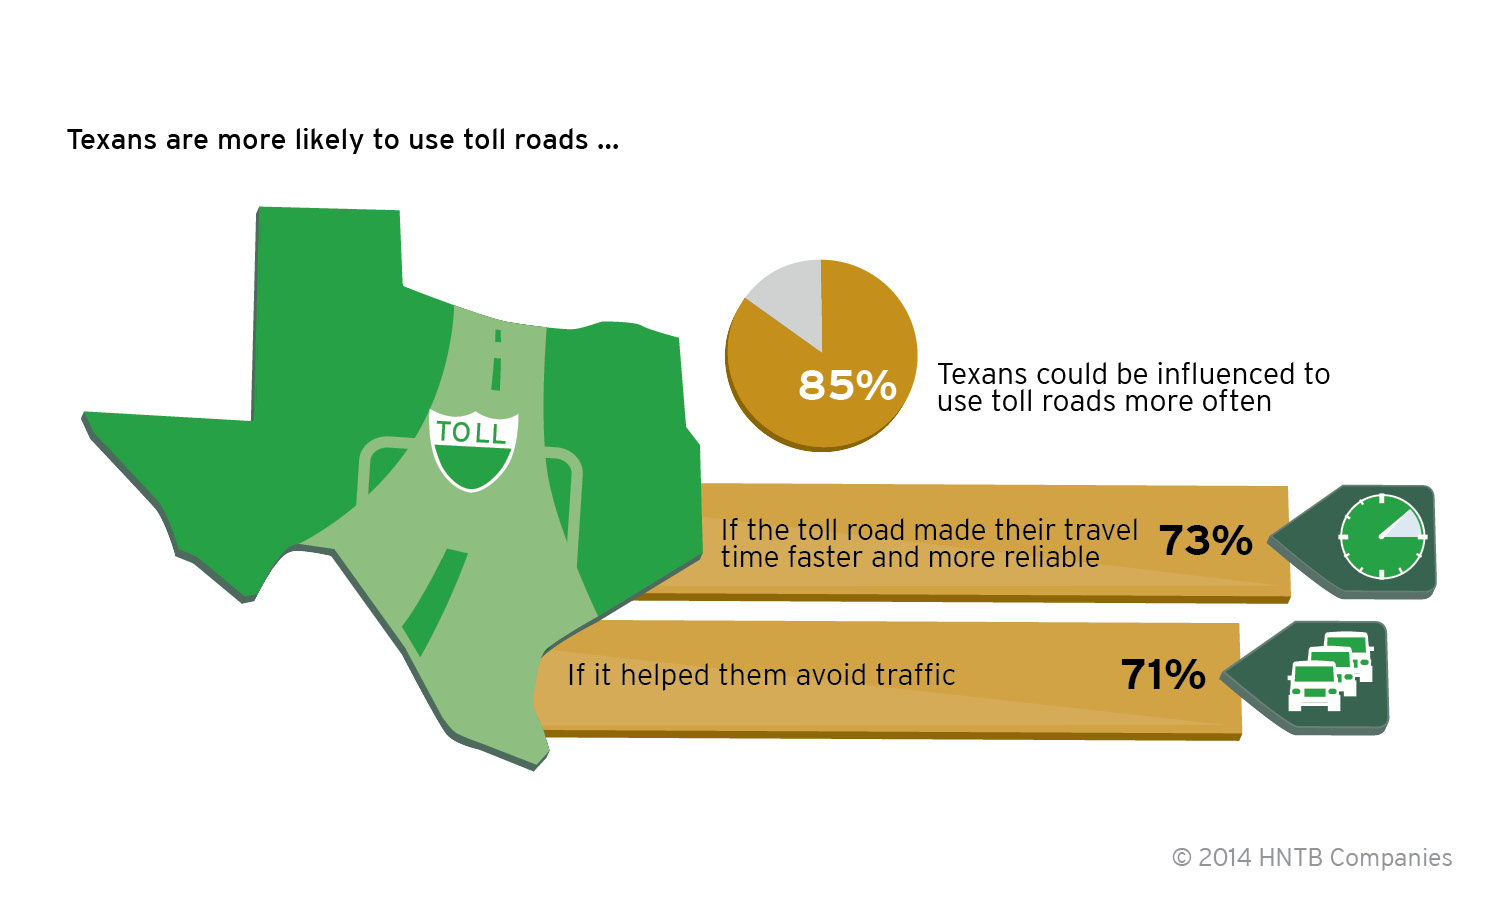 A top motivator for Texans who could be influenced to use toll roads more is reaching their destination more quickly.